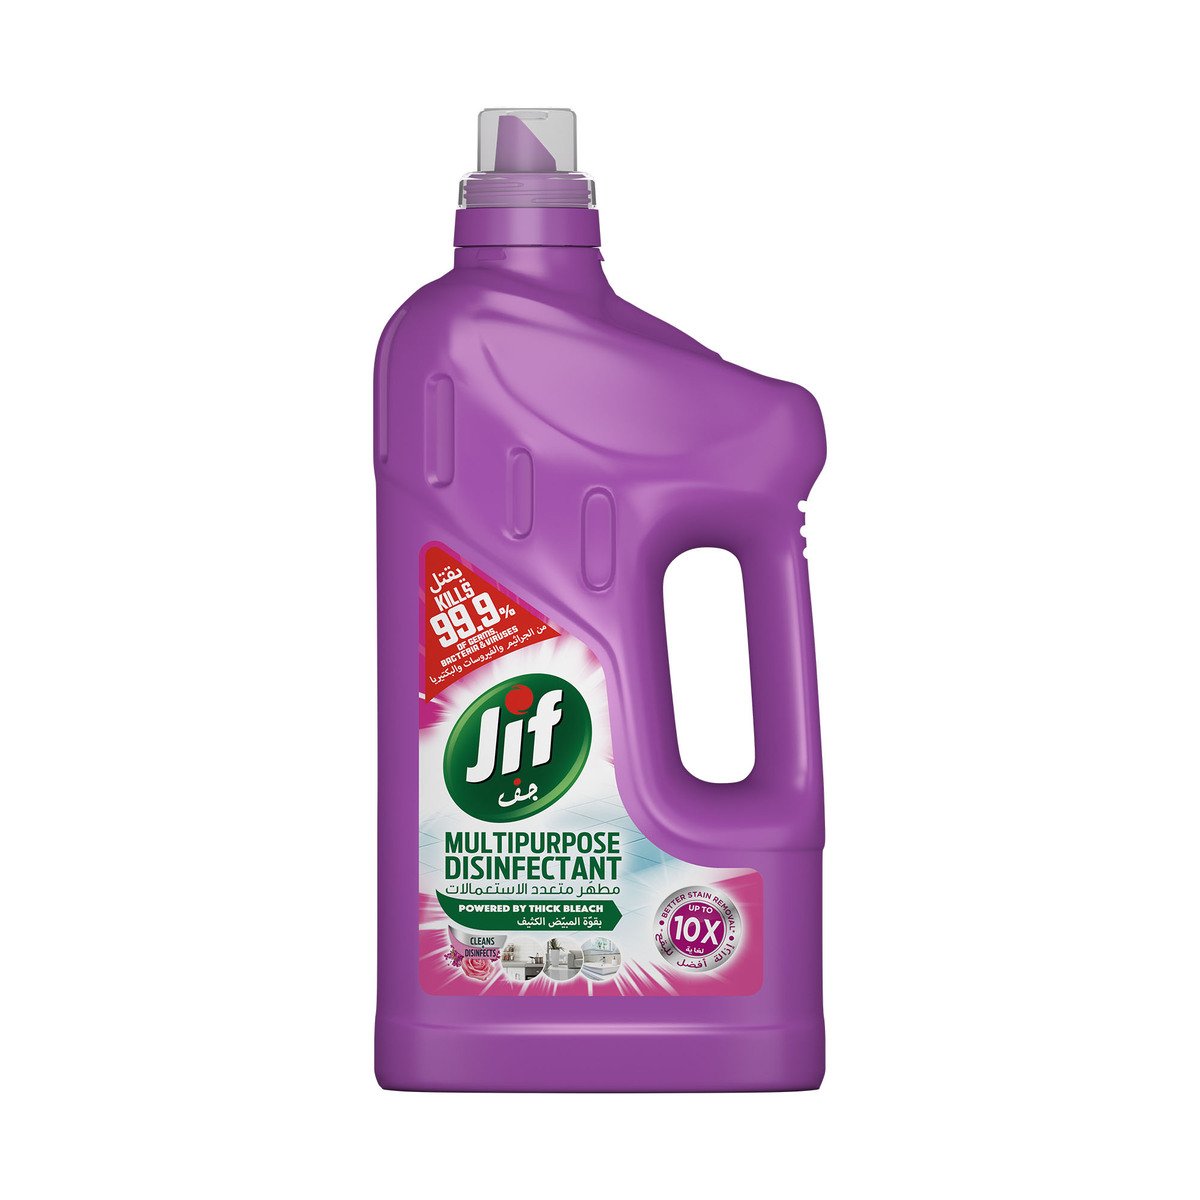 Jif Floral Breeze Multipurpose Disinfectant Value Pack 2 x 2 Litres